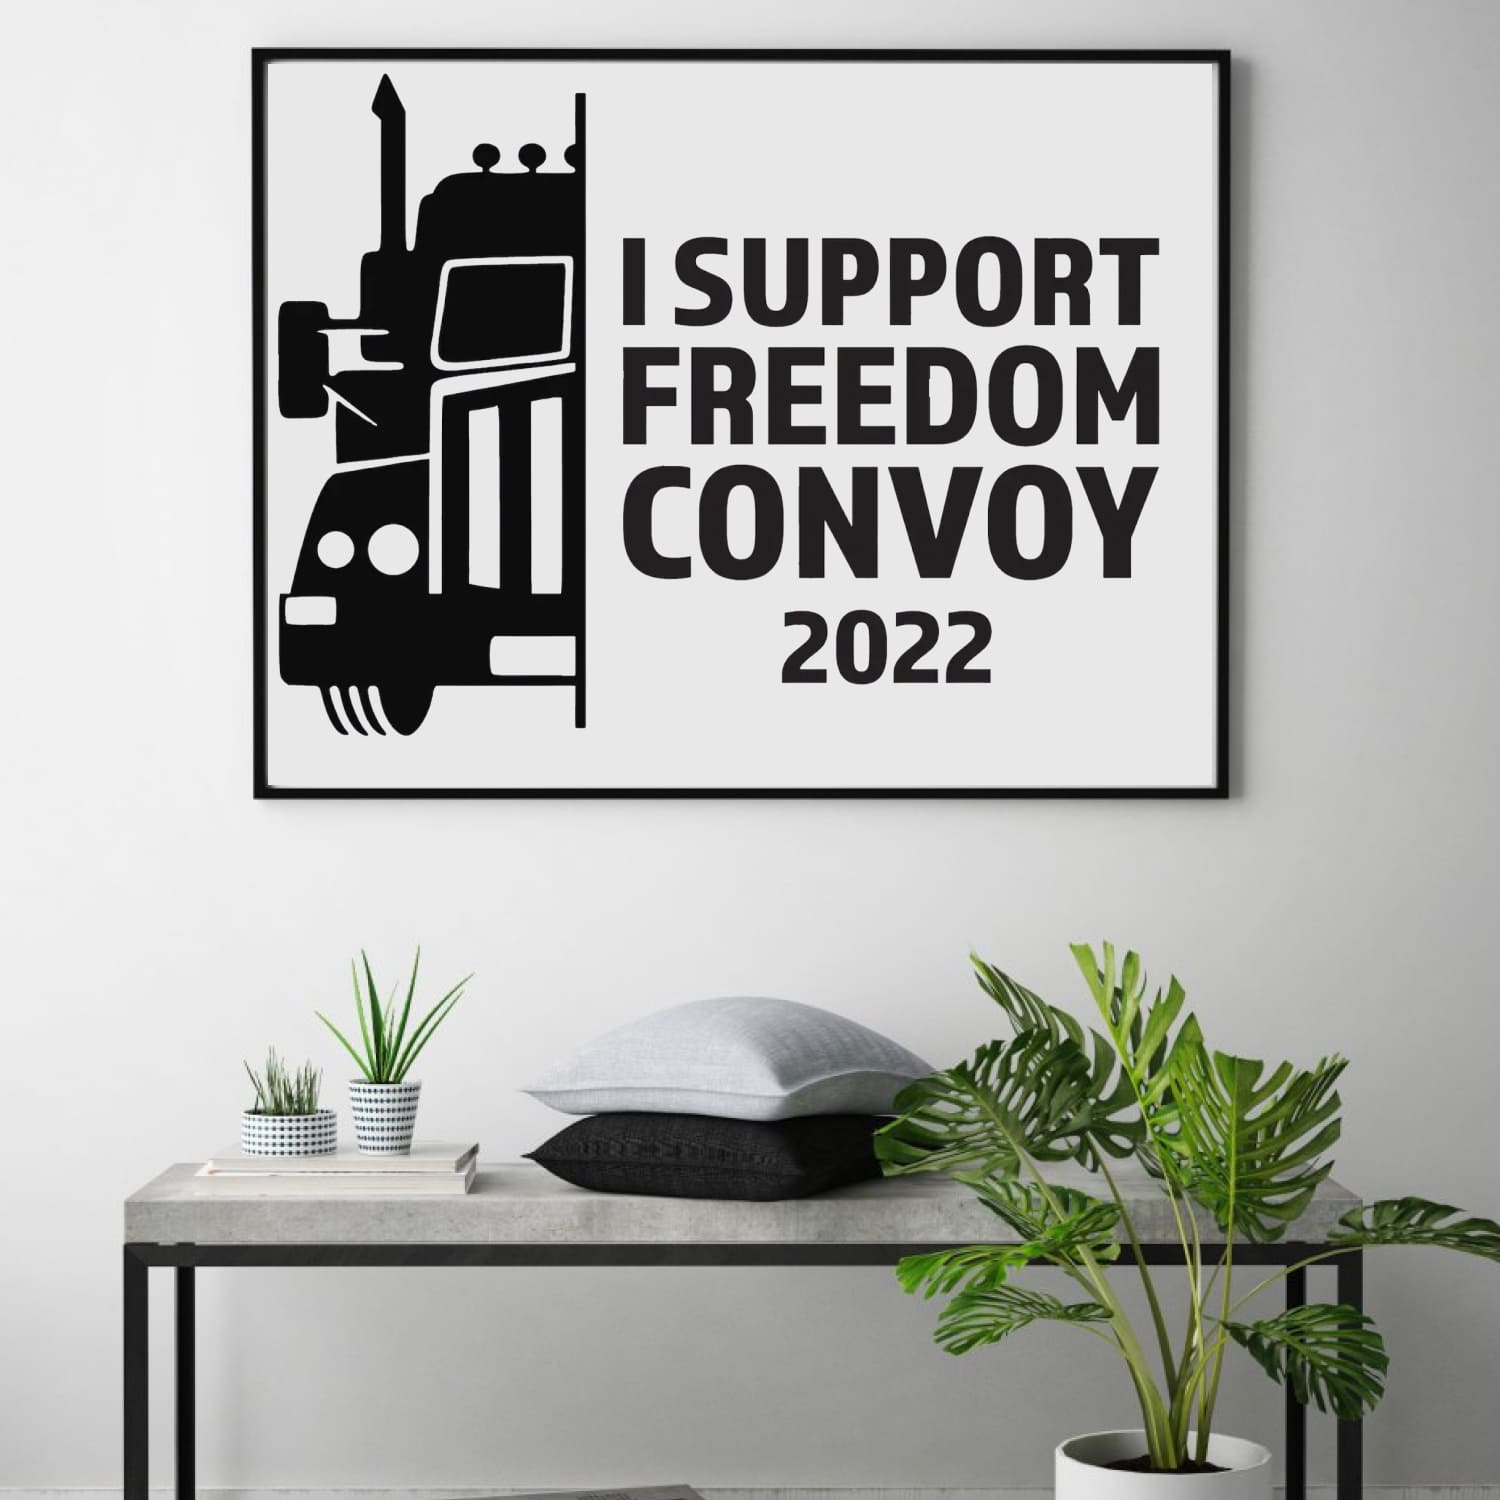 Freedom convoy 2022 svg cover.